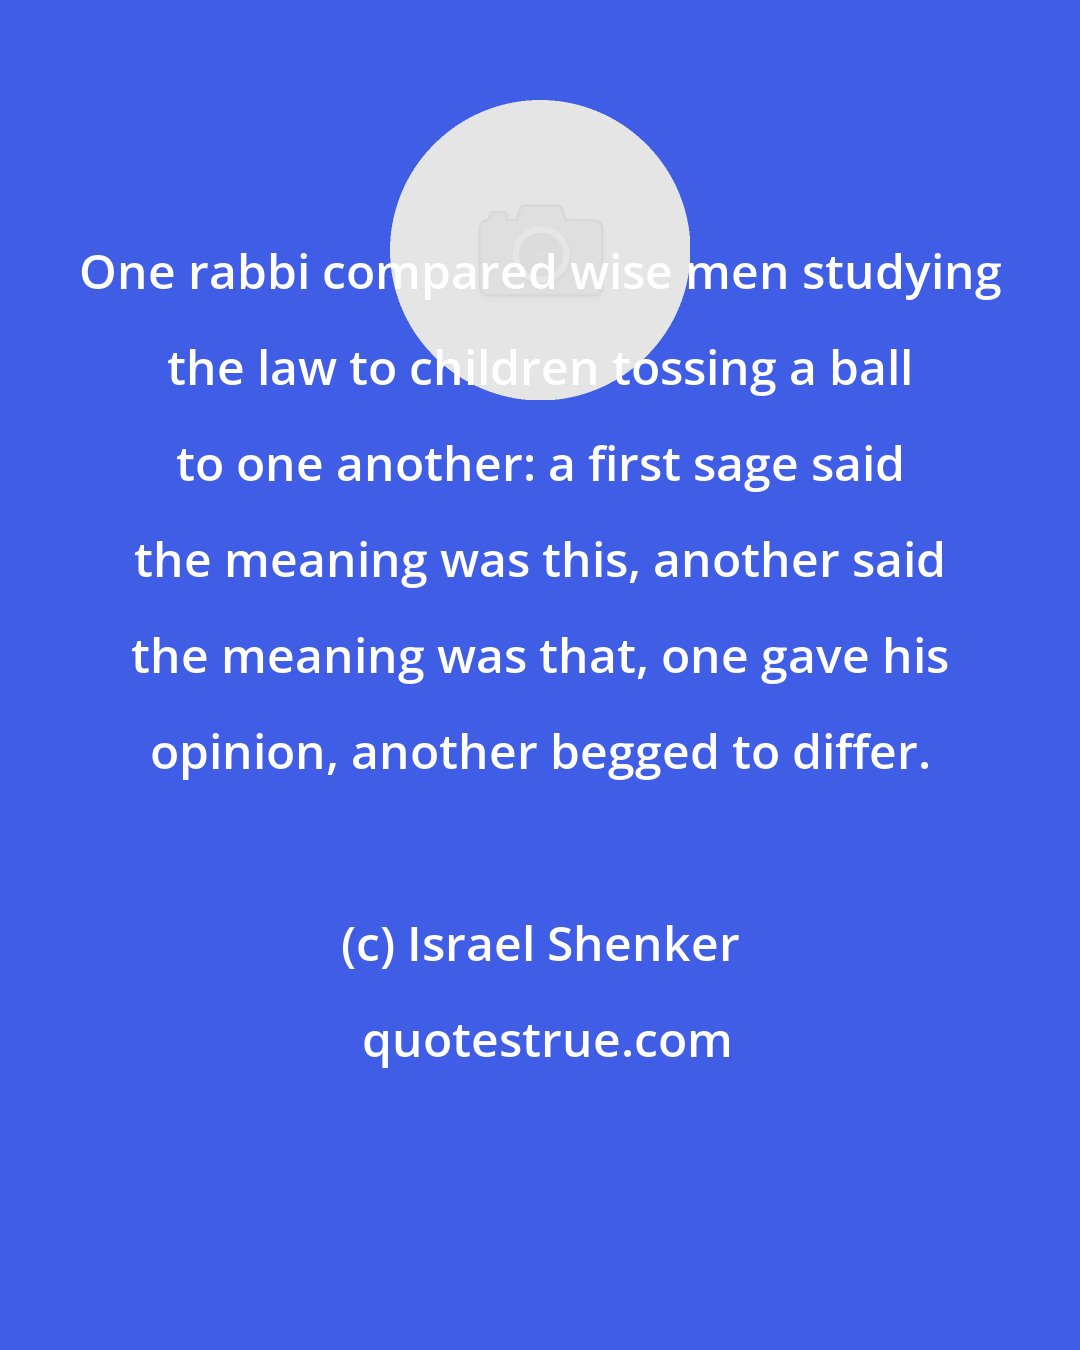 Israel Shenker: One rabbi compared wise men studying the law to children tossing a ball to one another: a first sage said the meaning was this, another said the meaning was that, one gave his opinion, another begged to differ.